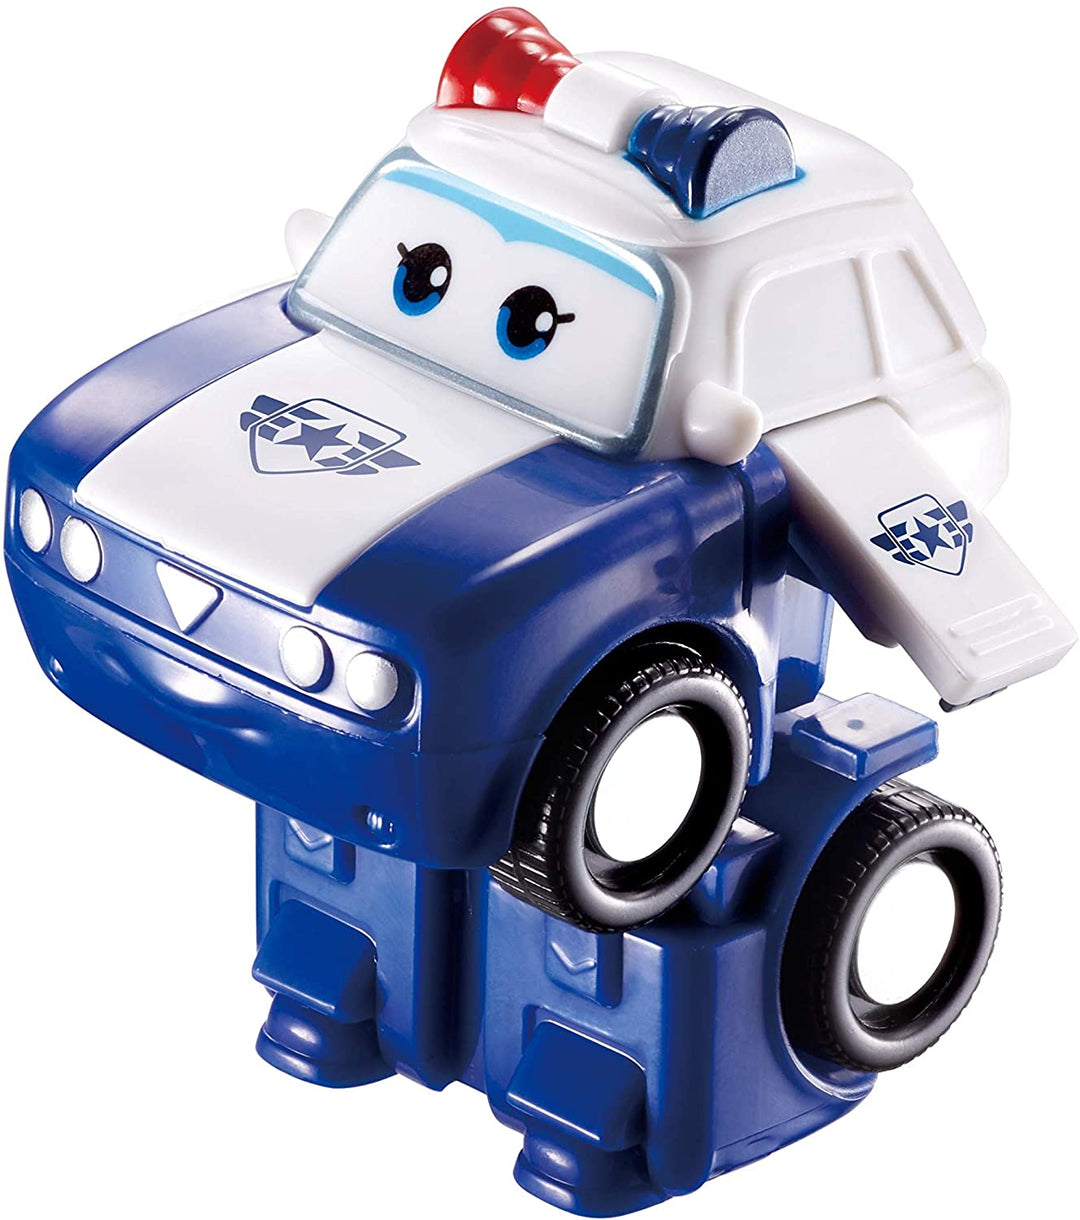 Super Wings Transform a Bots 4 Pack Toy Figures 2 Inch Figures